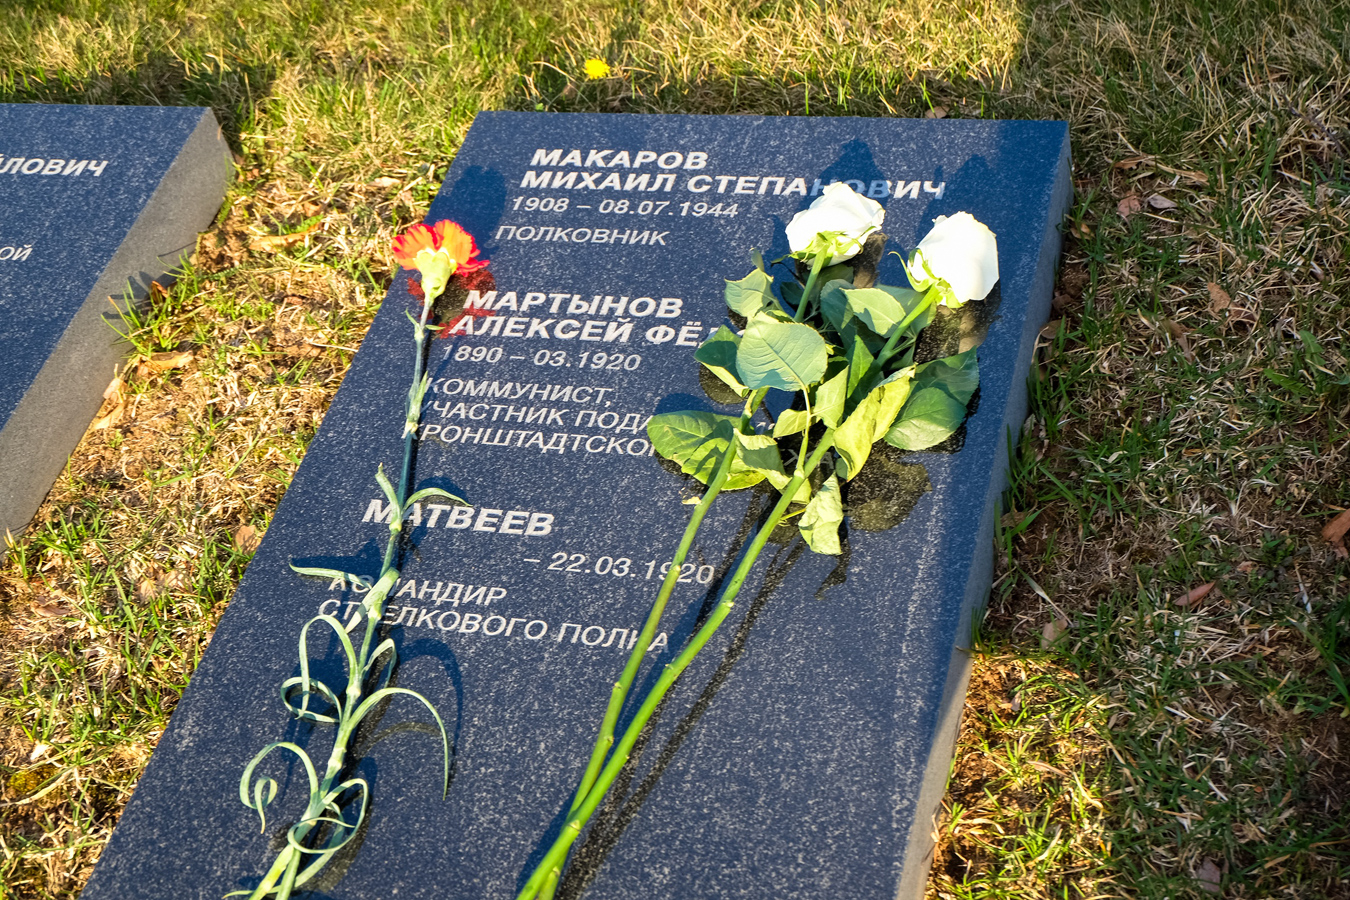 May 8, 2022. Common Grave of Communists